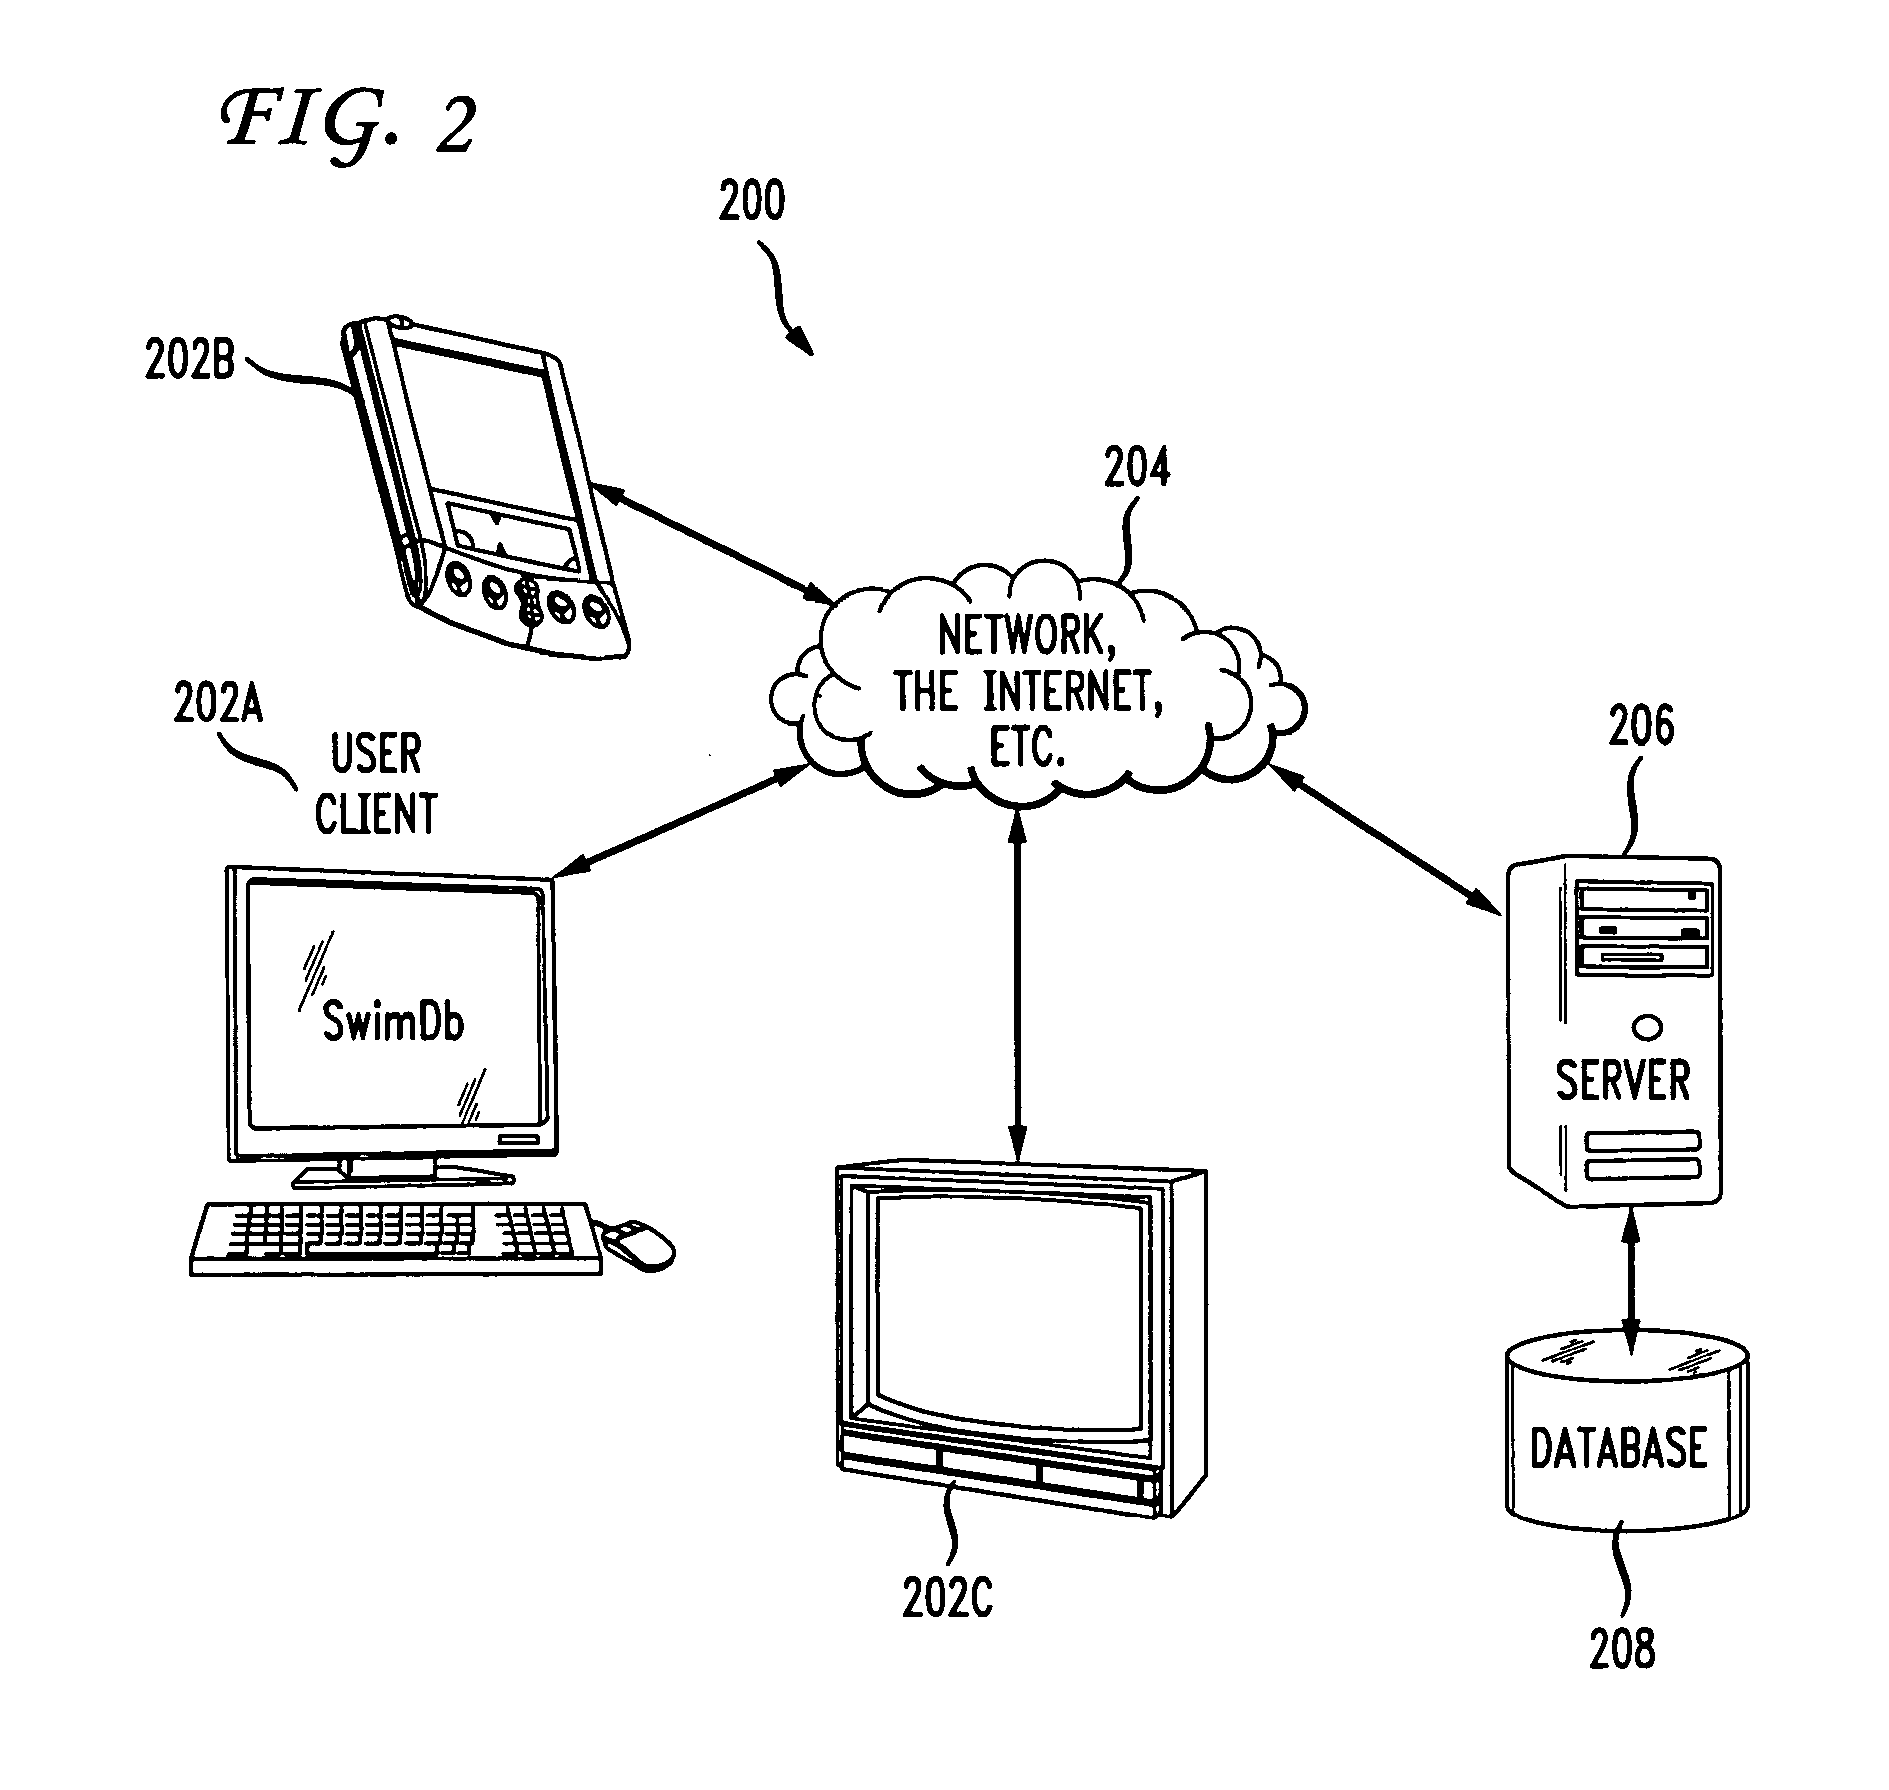 System and method for searching and analyzing media content